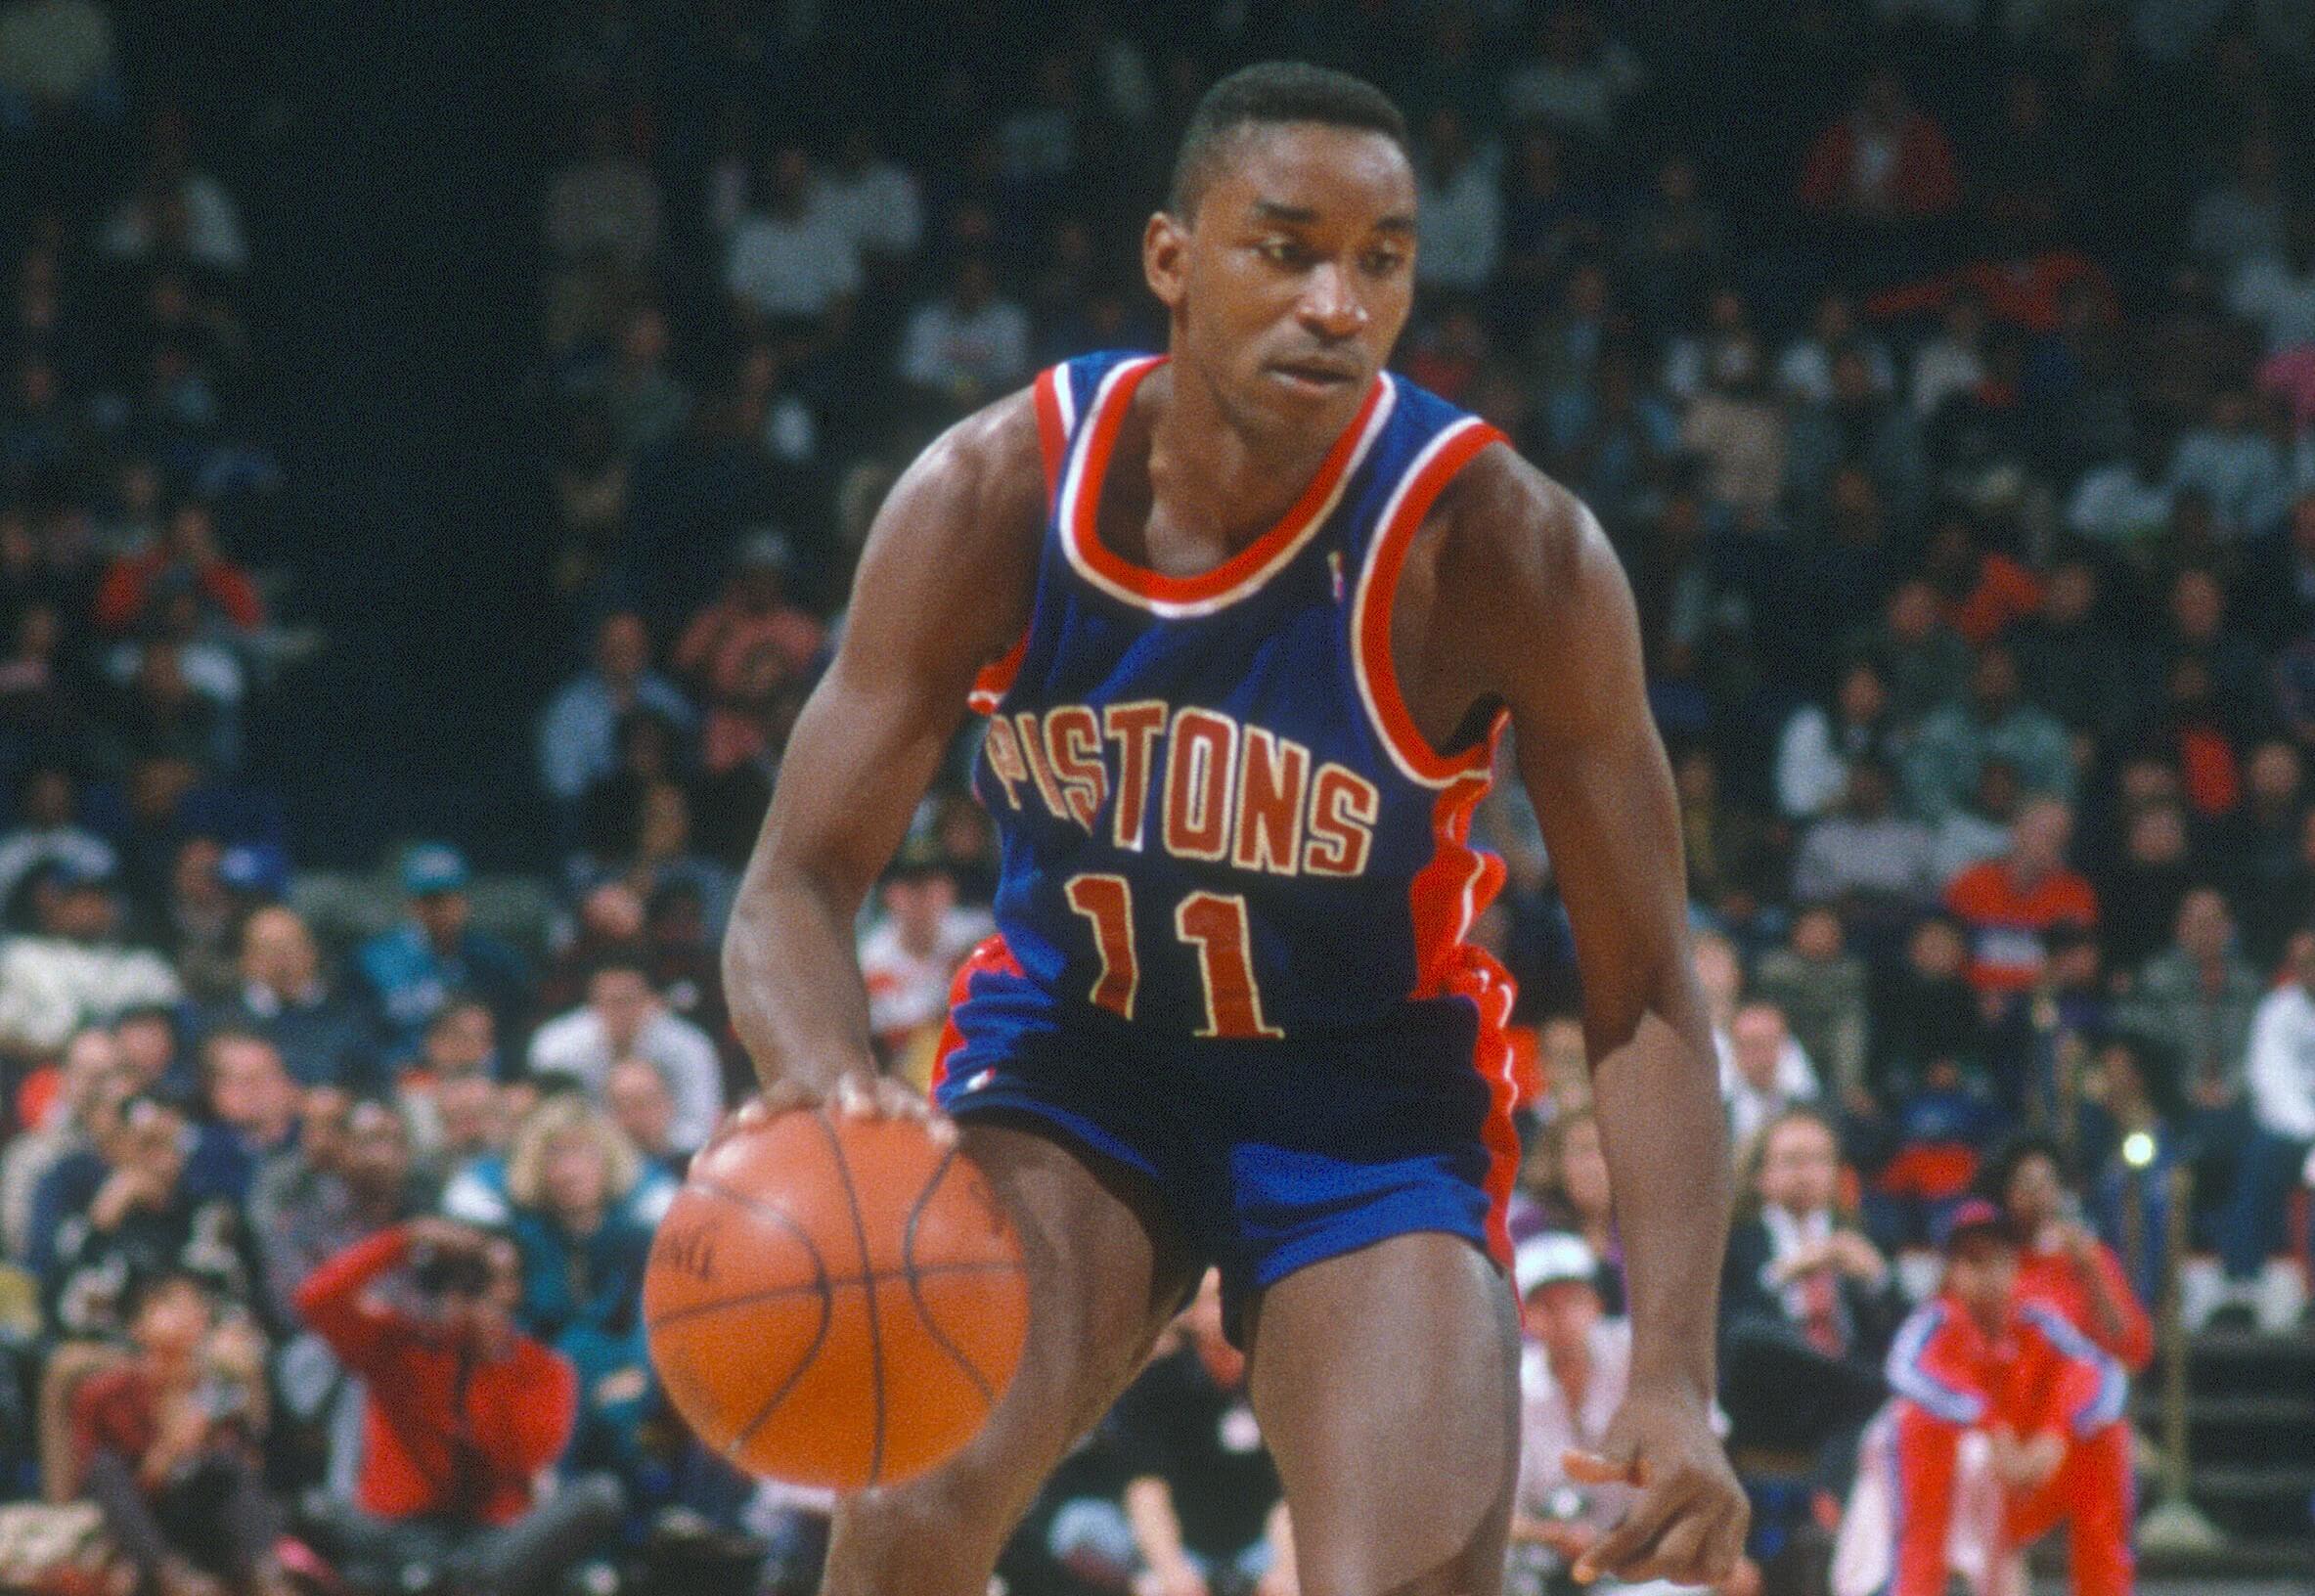 Isiah Thomas Reflects on Demoralizing Turnover Against the Boston Celtics in 1987 and How Bill Russell Came to His Rescue